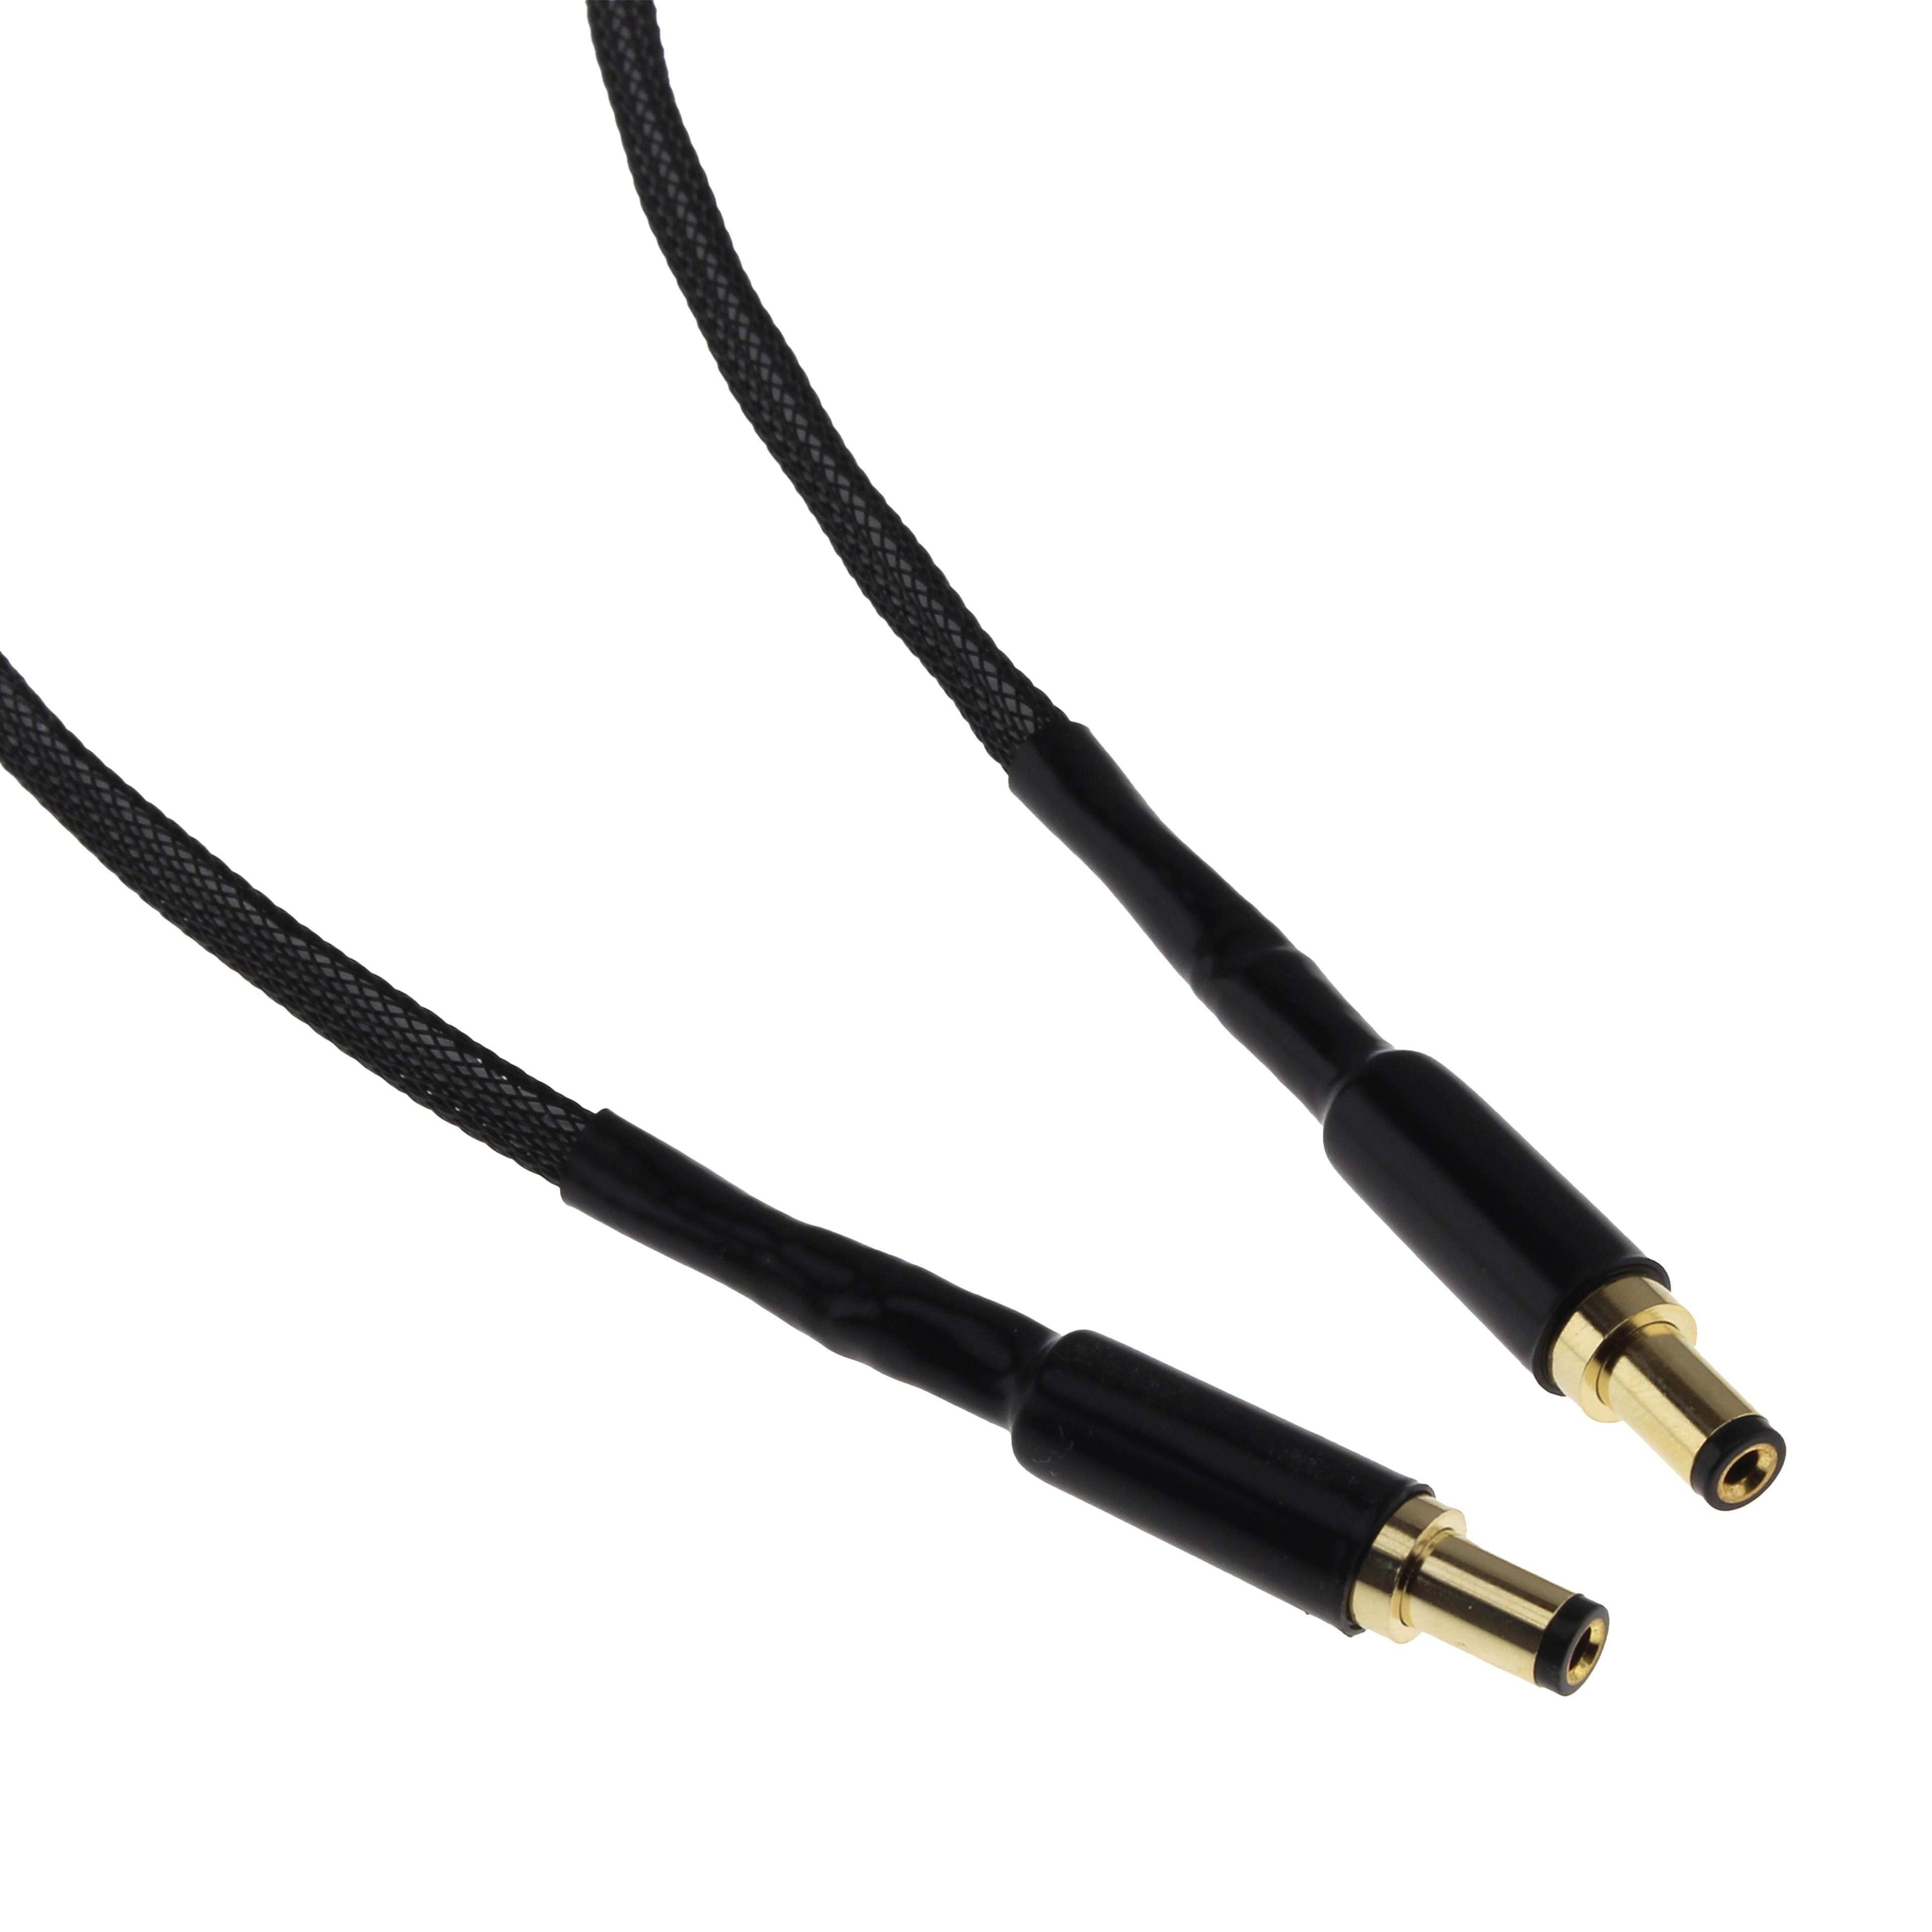 XANGSANE DC05 Power Cable Jack DC 5.5/2.5mm to Jack DC 5.5/2.5mm Gold-plated 1m